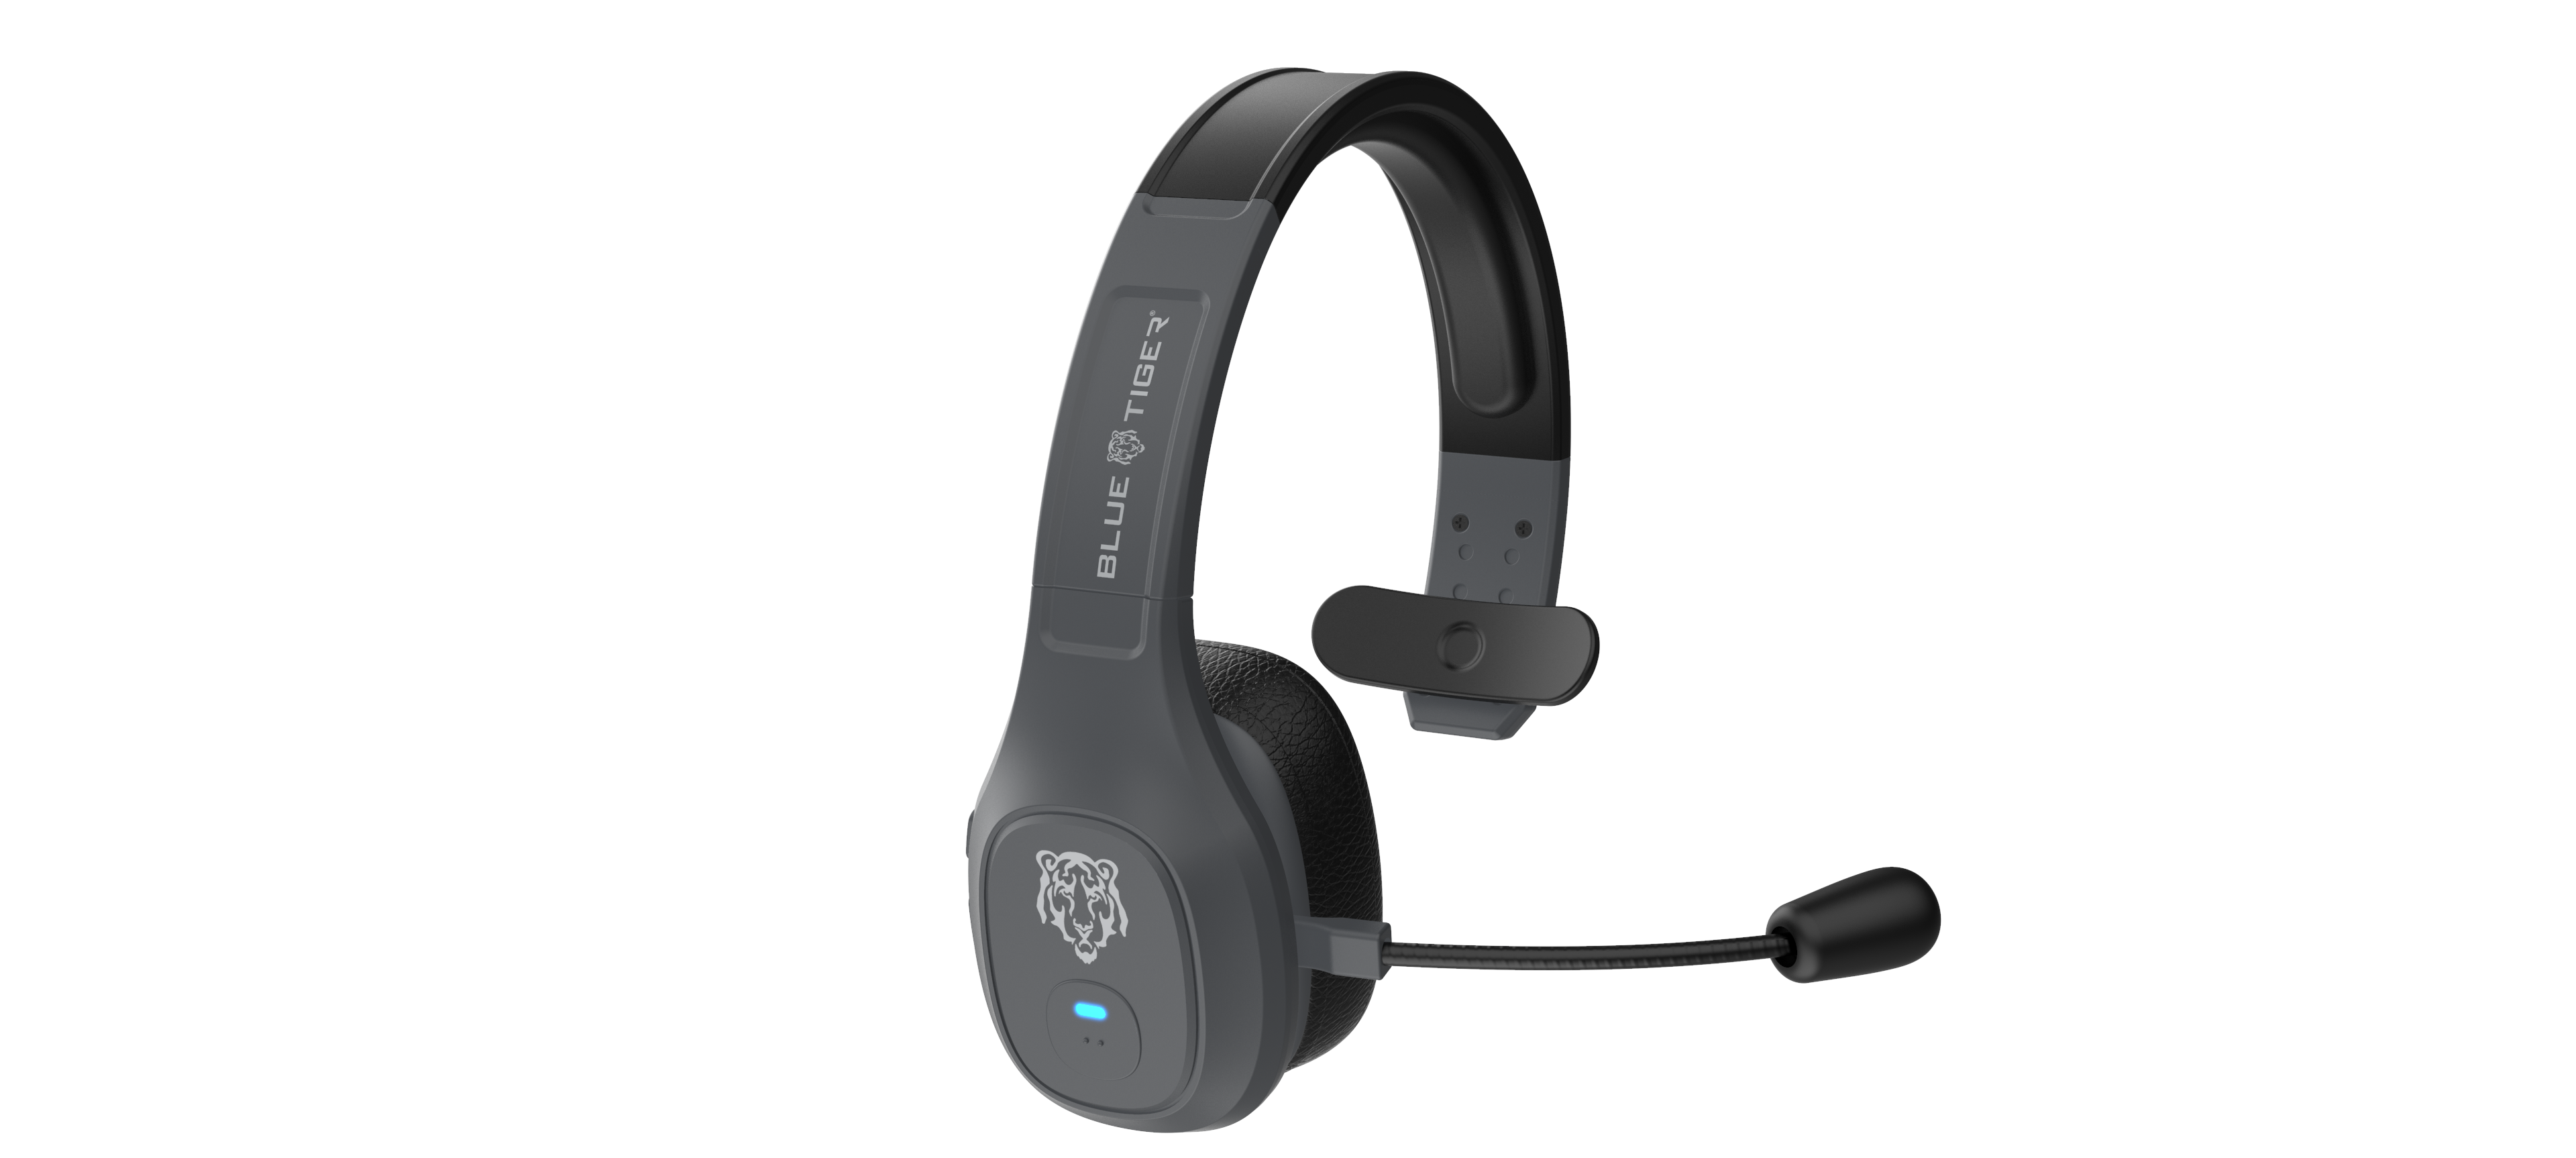 The Storm, Single Ear, Noise Cancellation Bluetooth Headset with Microphone